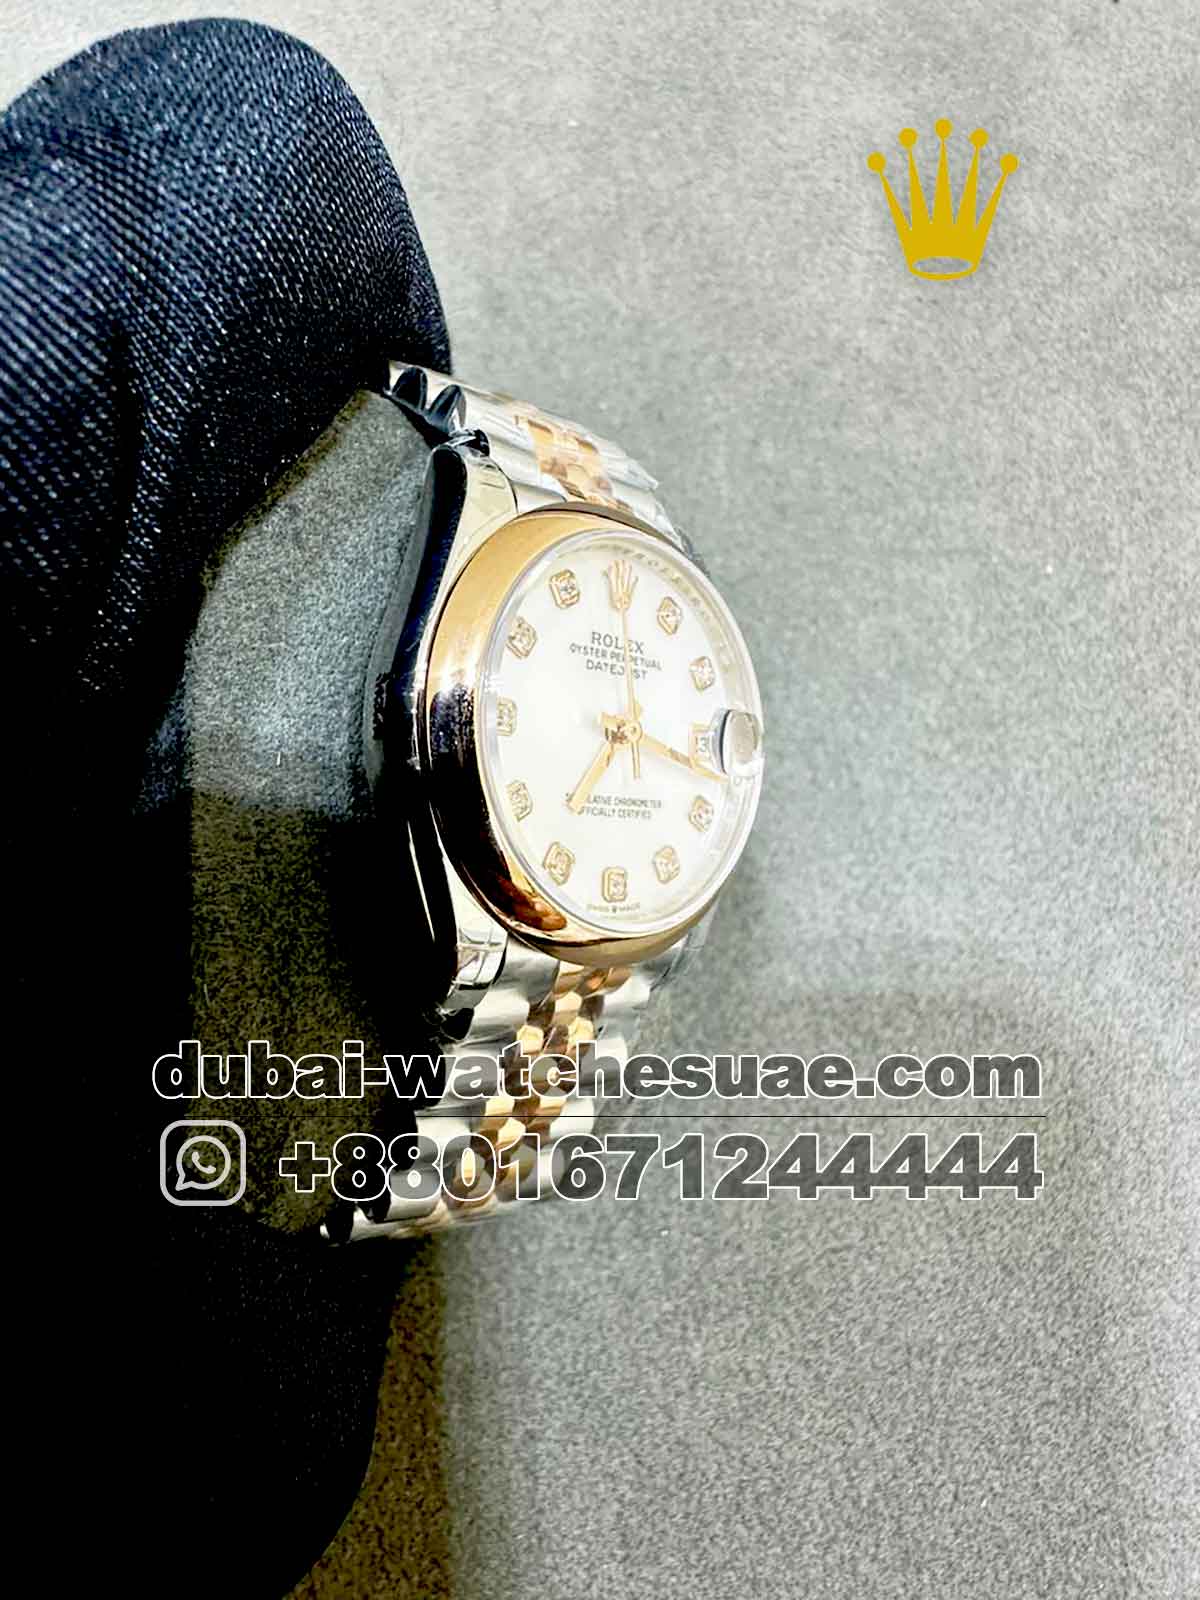 Replica Rolex 31 mm date just White  Dial Stone Numeric ,Plain Rose Gold Bezel with Two Tone Jubilee  Bracelet